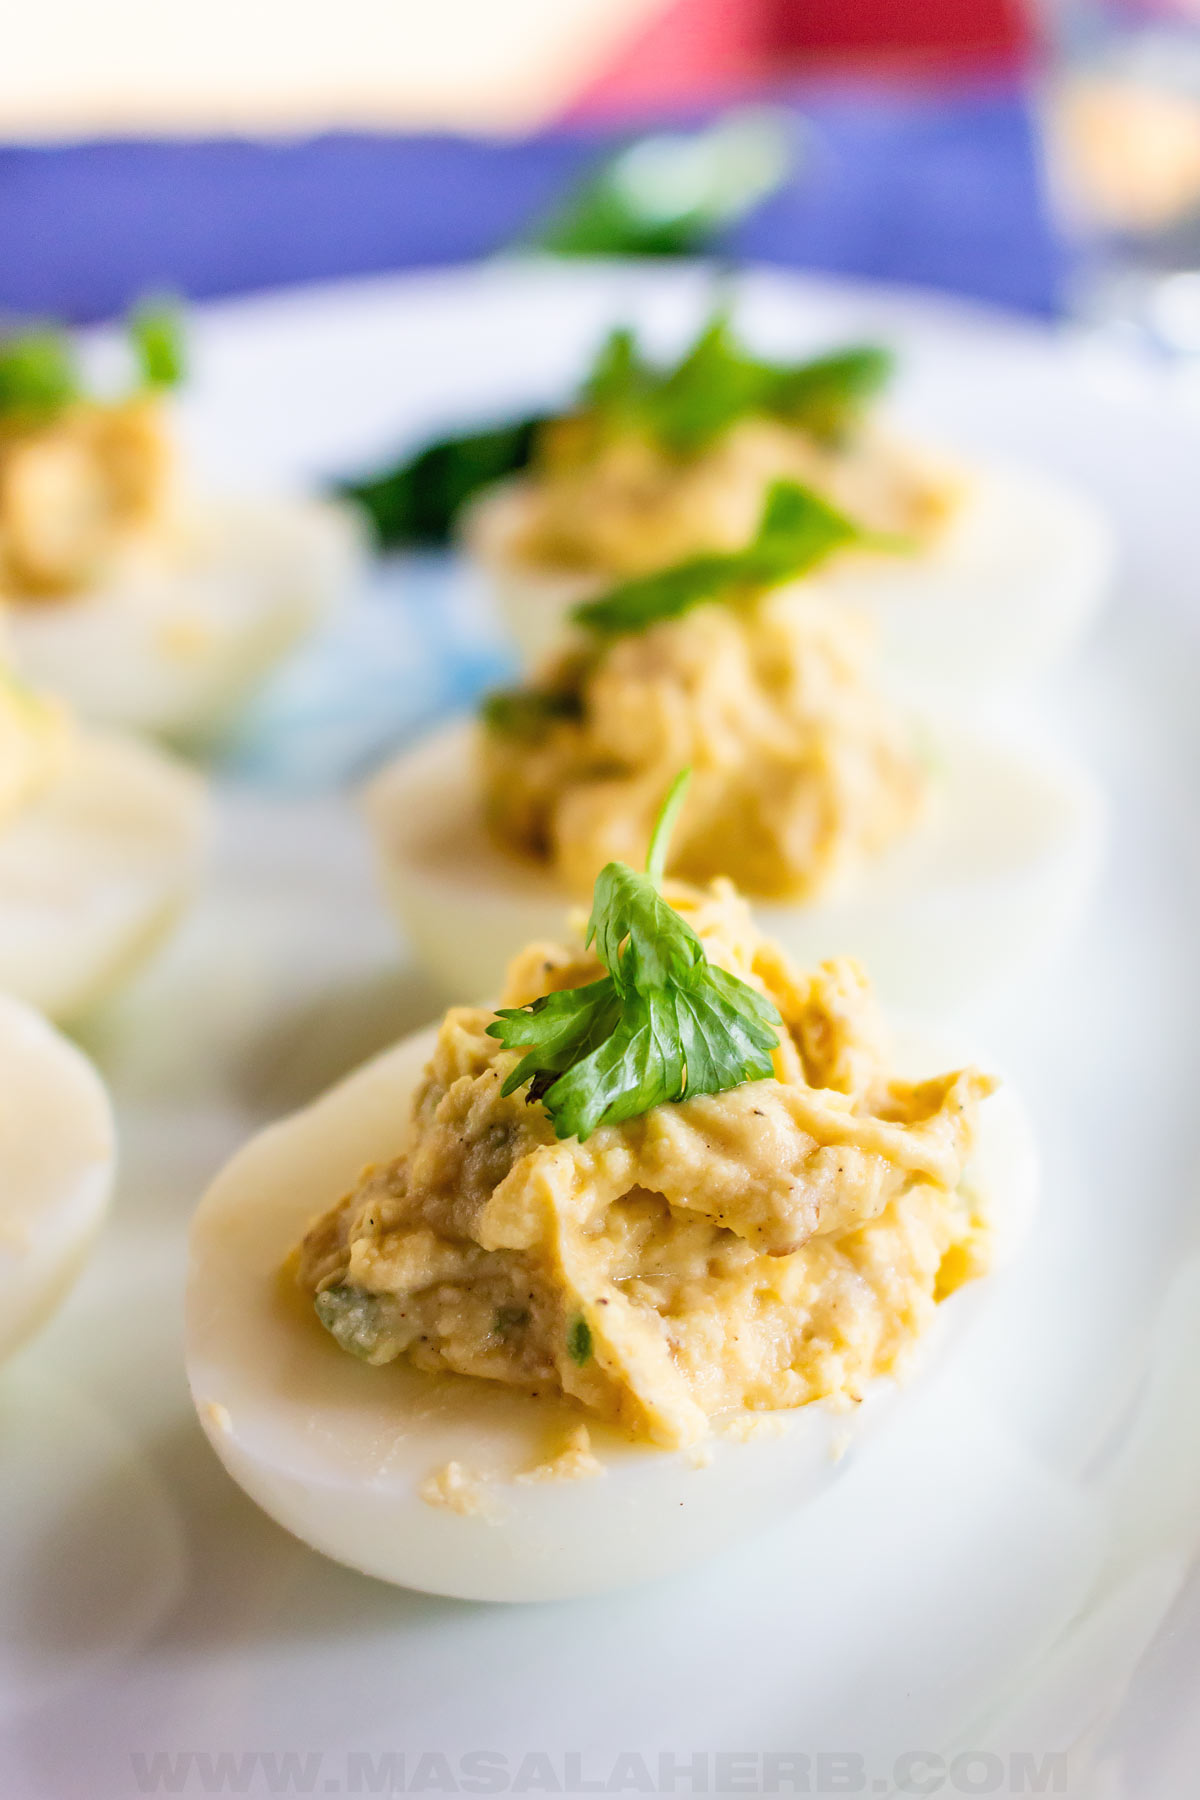 Hot Deviled Eggs filled with Jalapeño